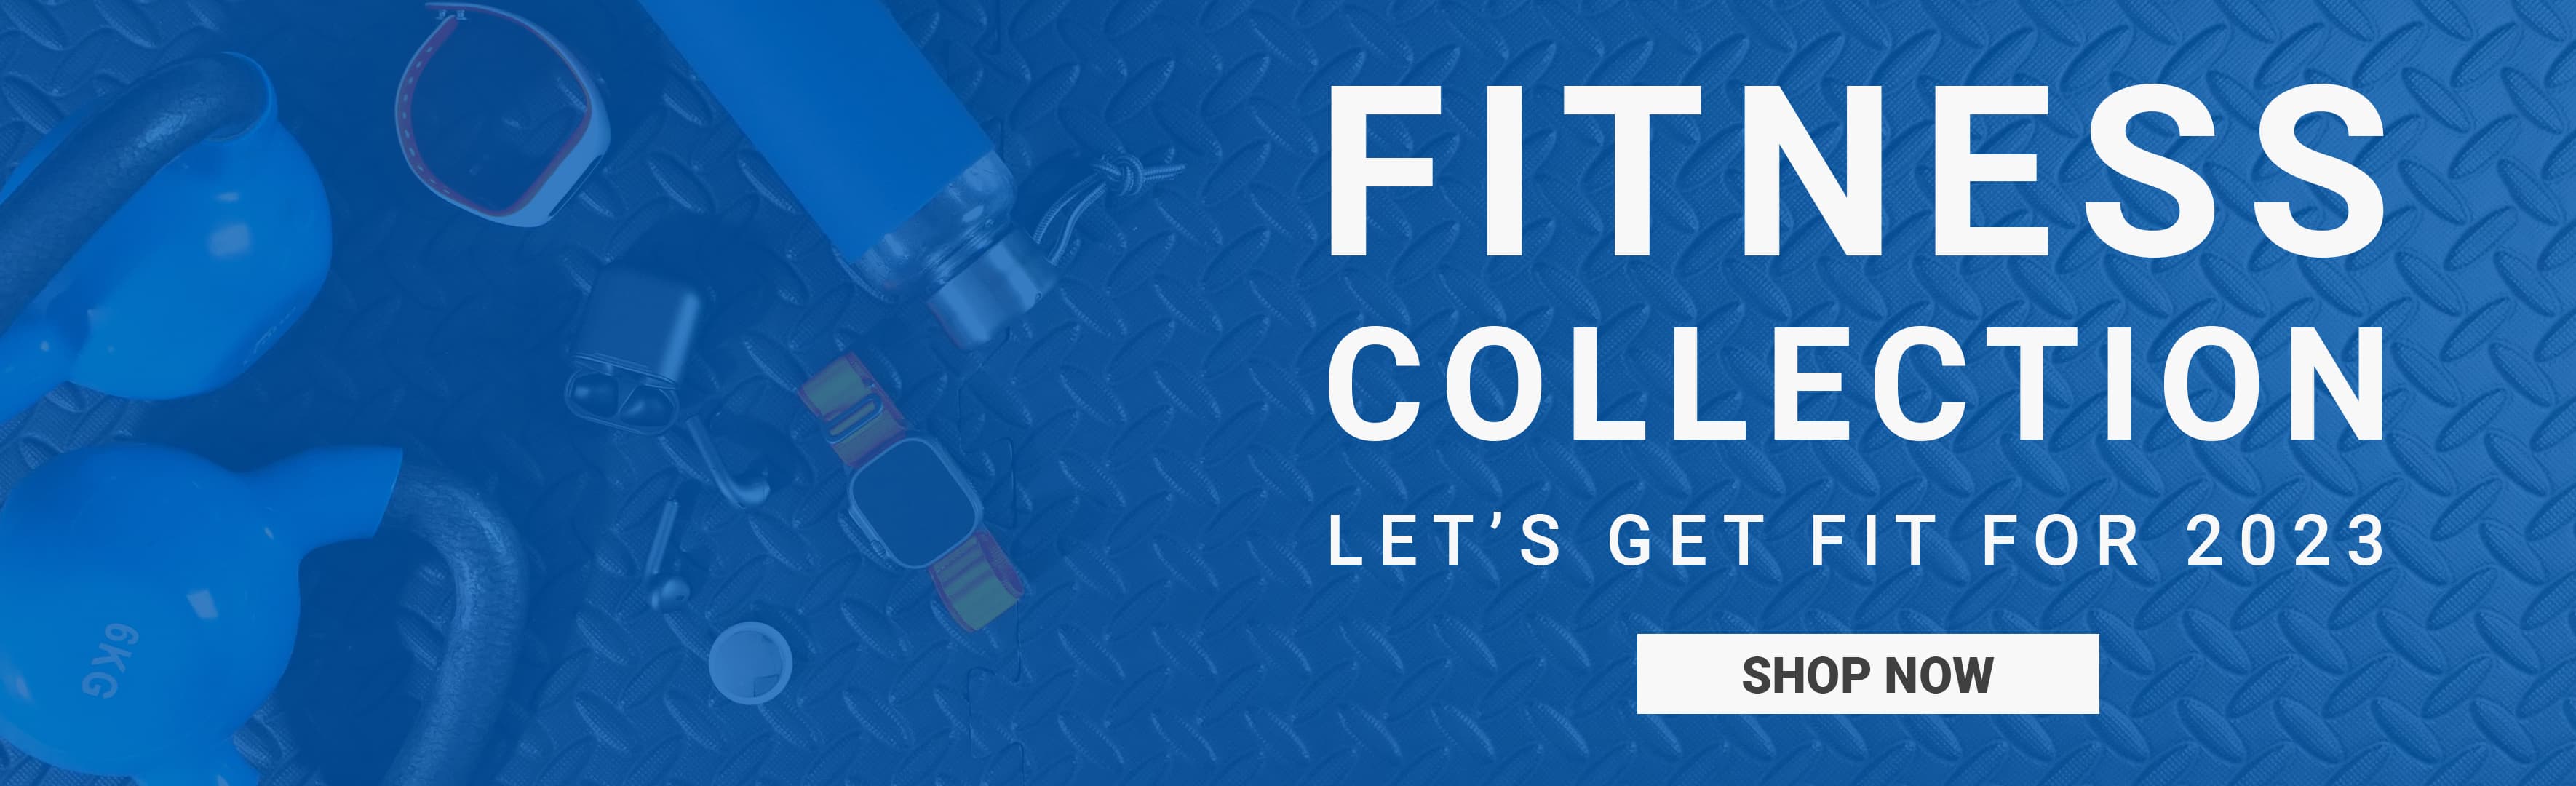 Fitness Collection